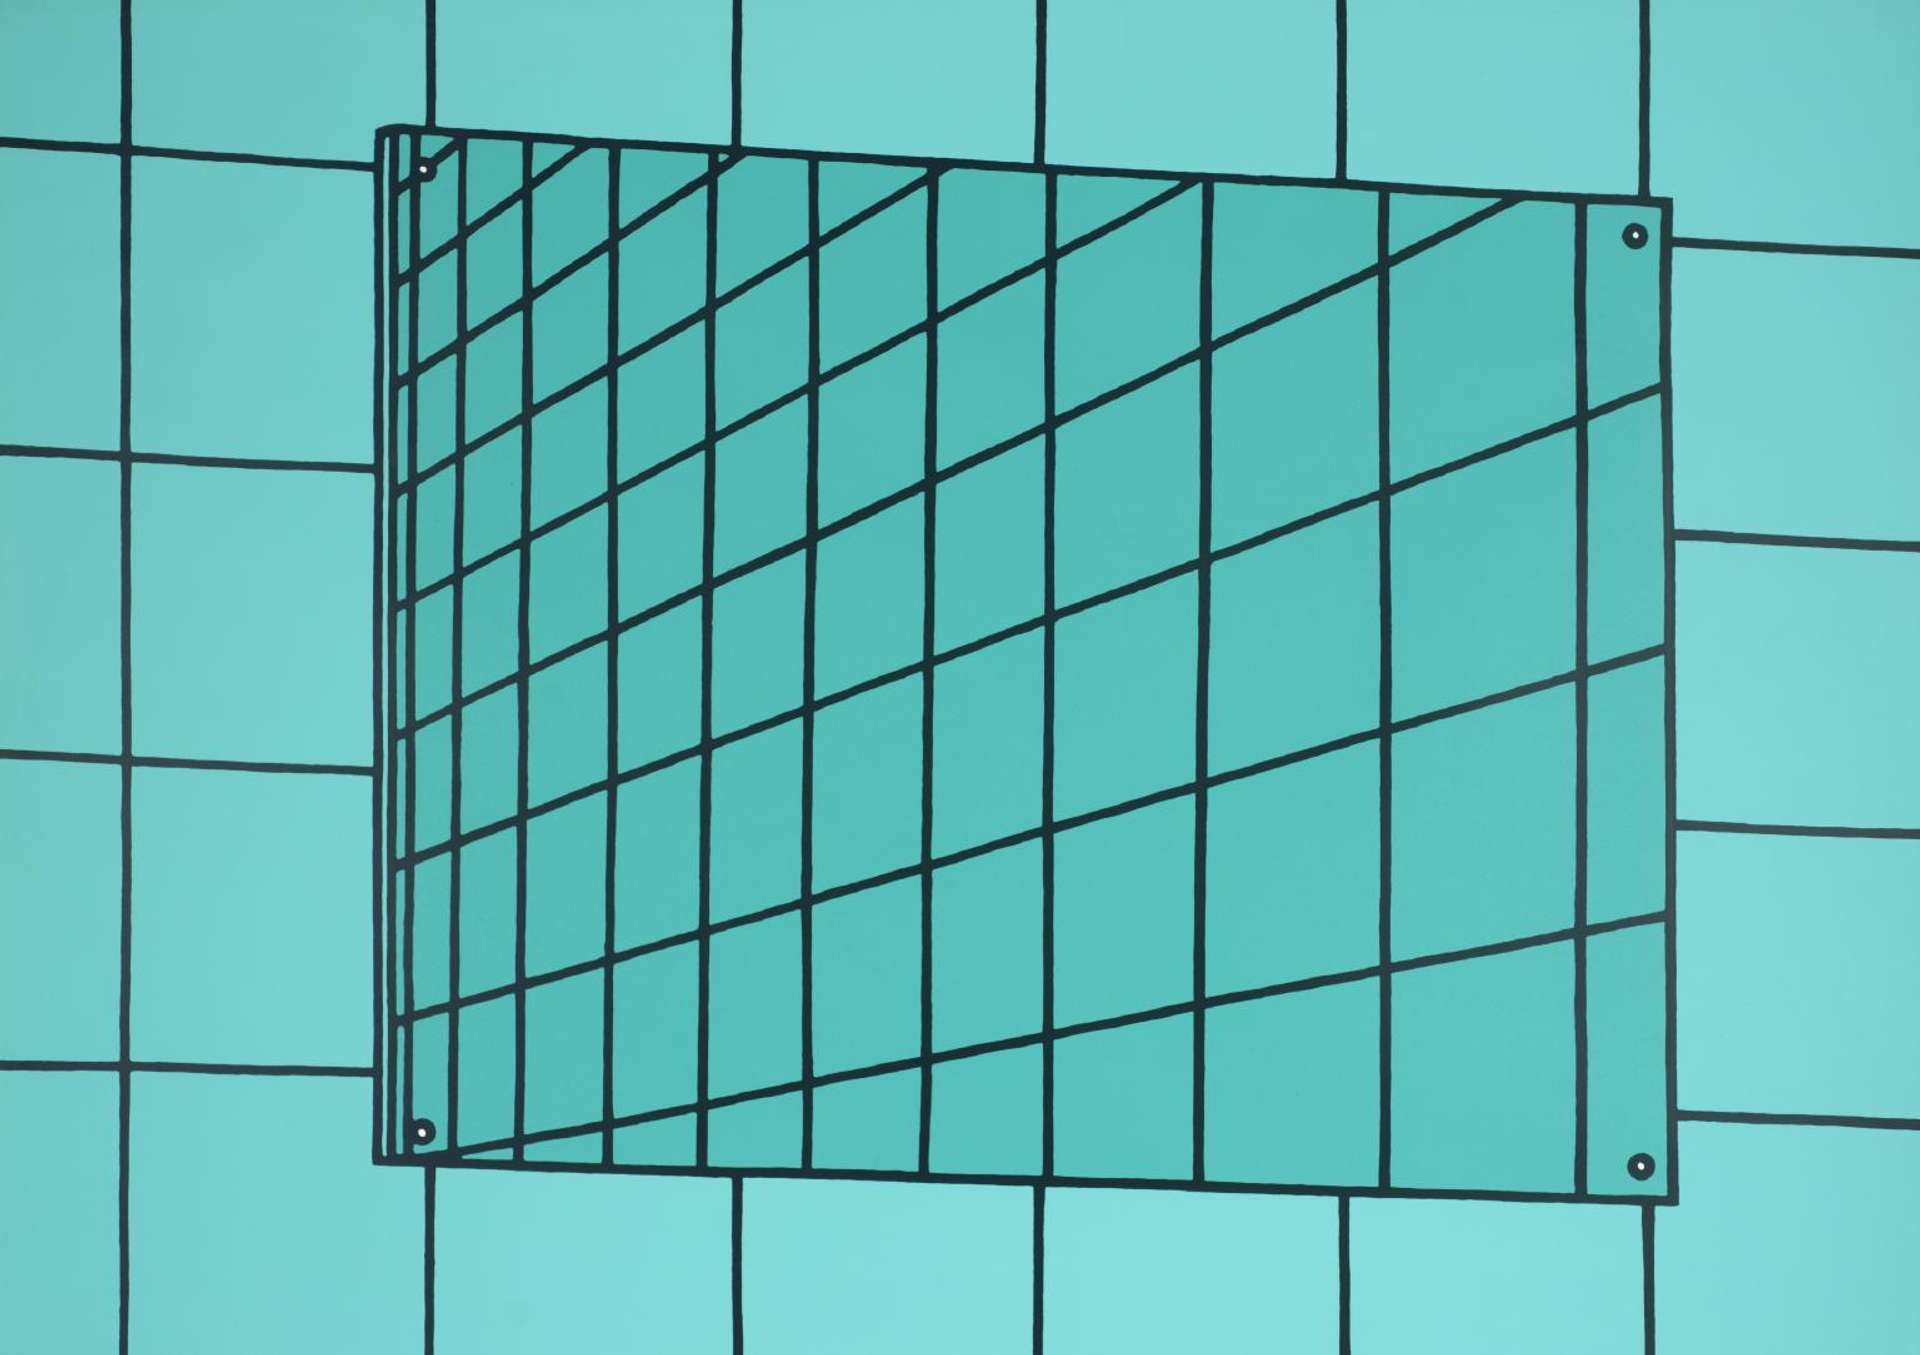 A printed image the by the artist Patrick Caulfield, which depicts a teal coloured bathroom mirror and walls, with interposing squares as tiles.